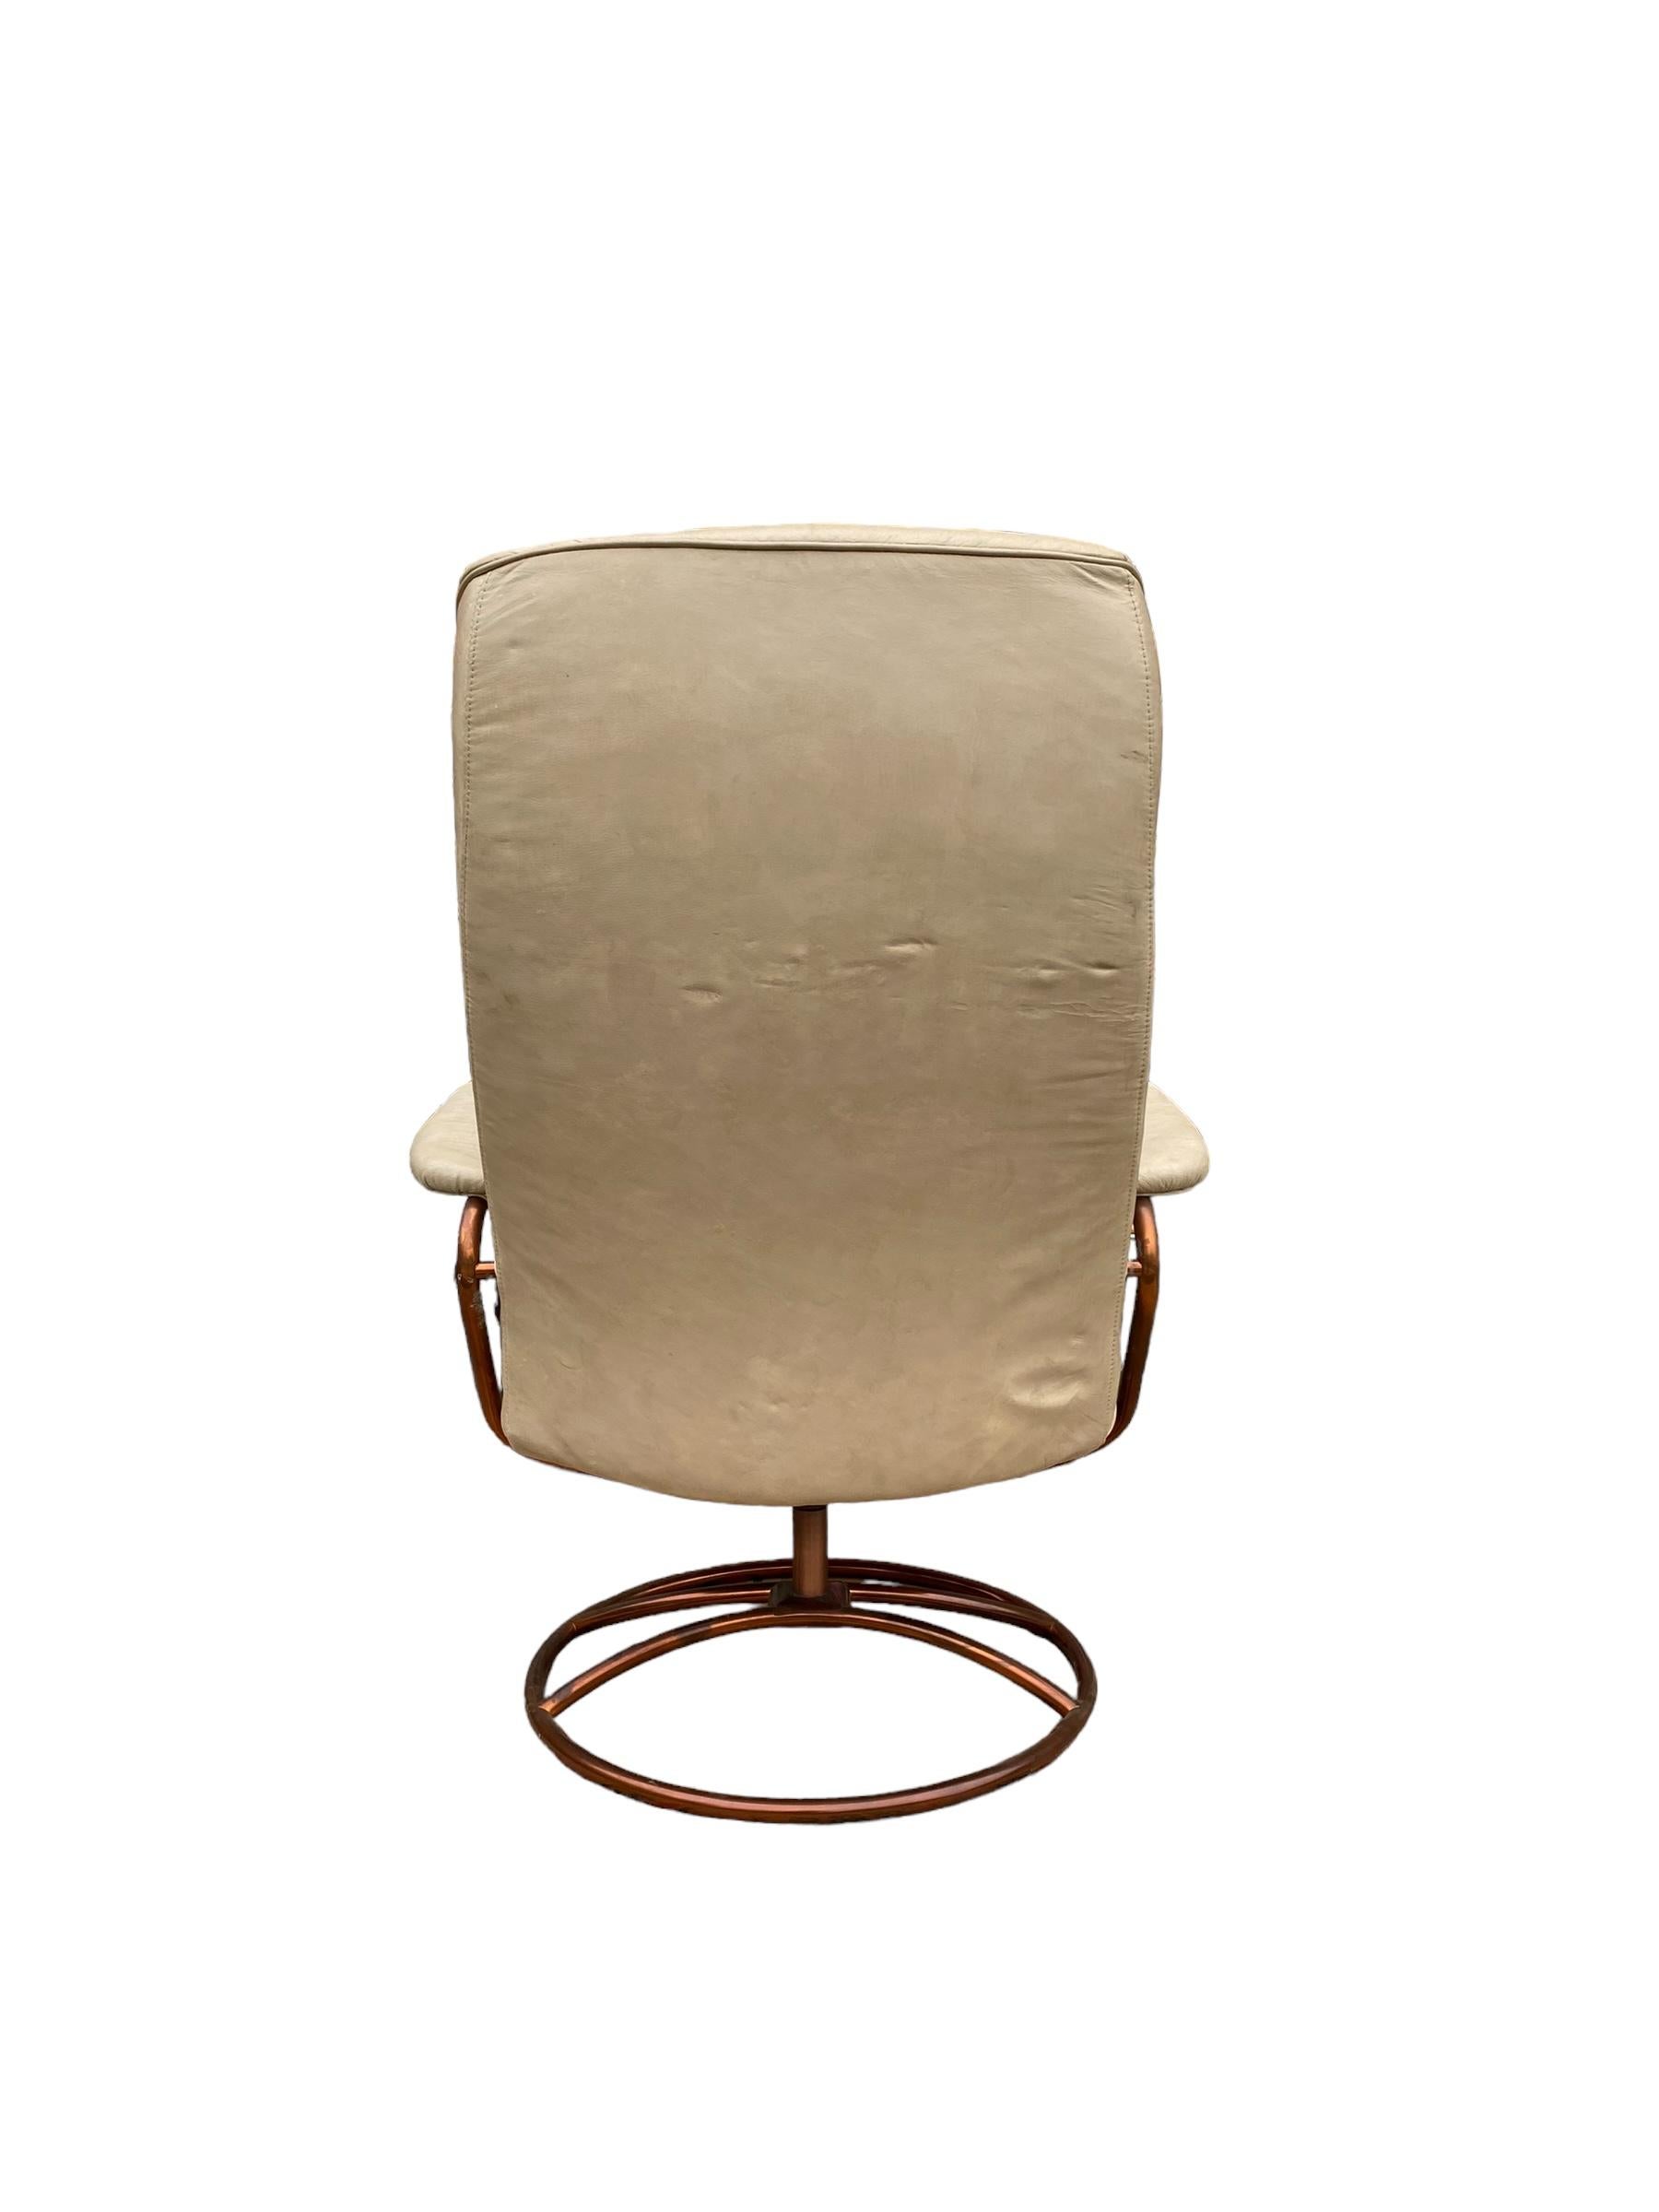 Post Modern Stressless Lounge Chair and Ottoman with copper frame In Fair Condition For Sale In Brooklyn, NY